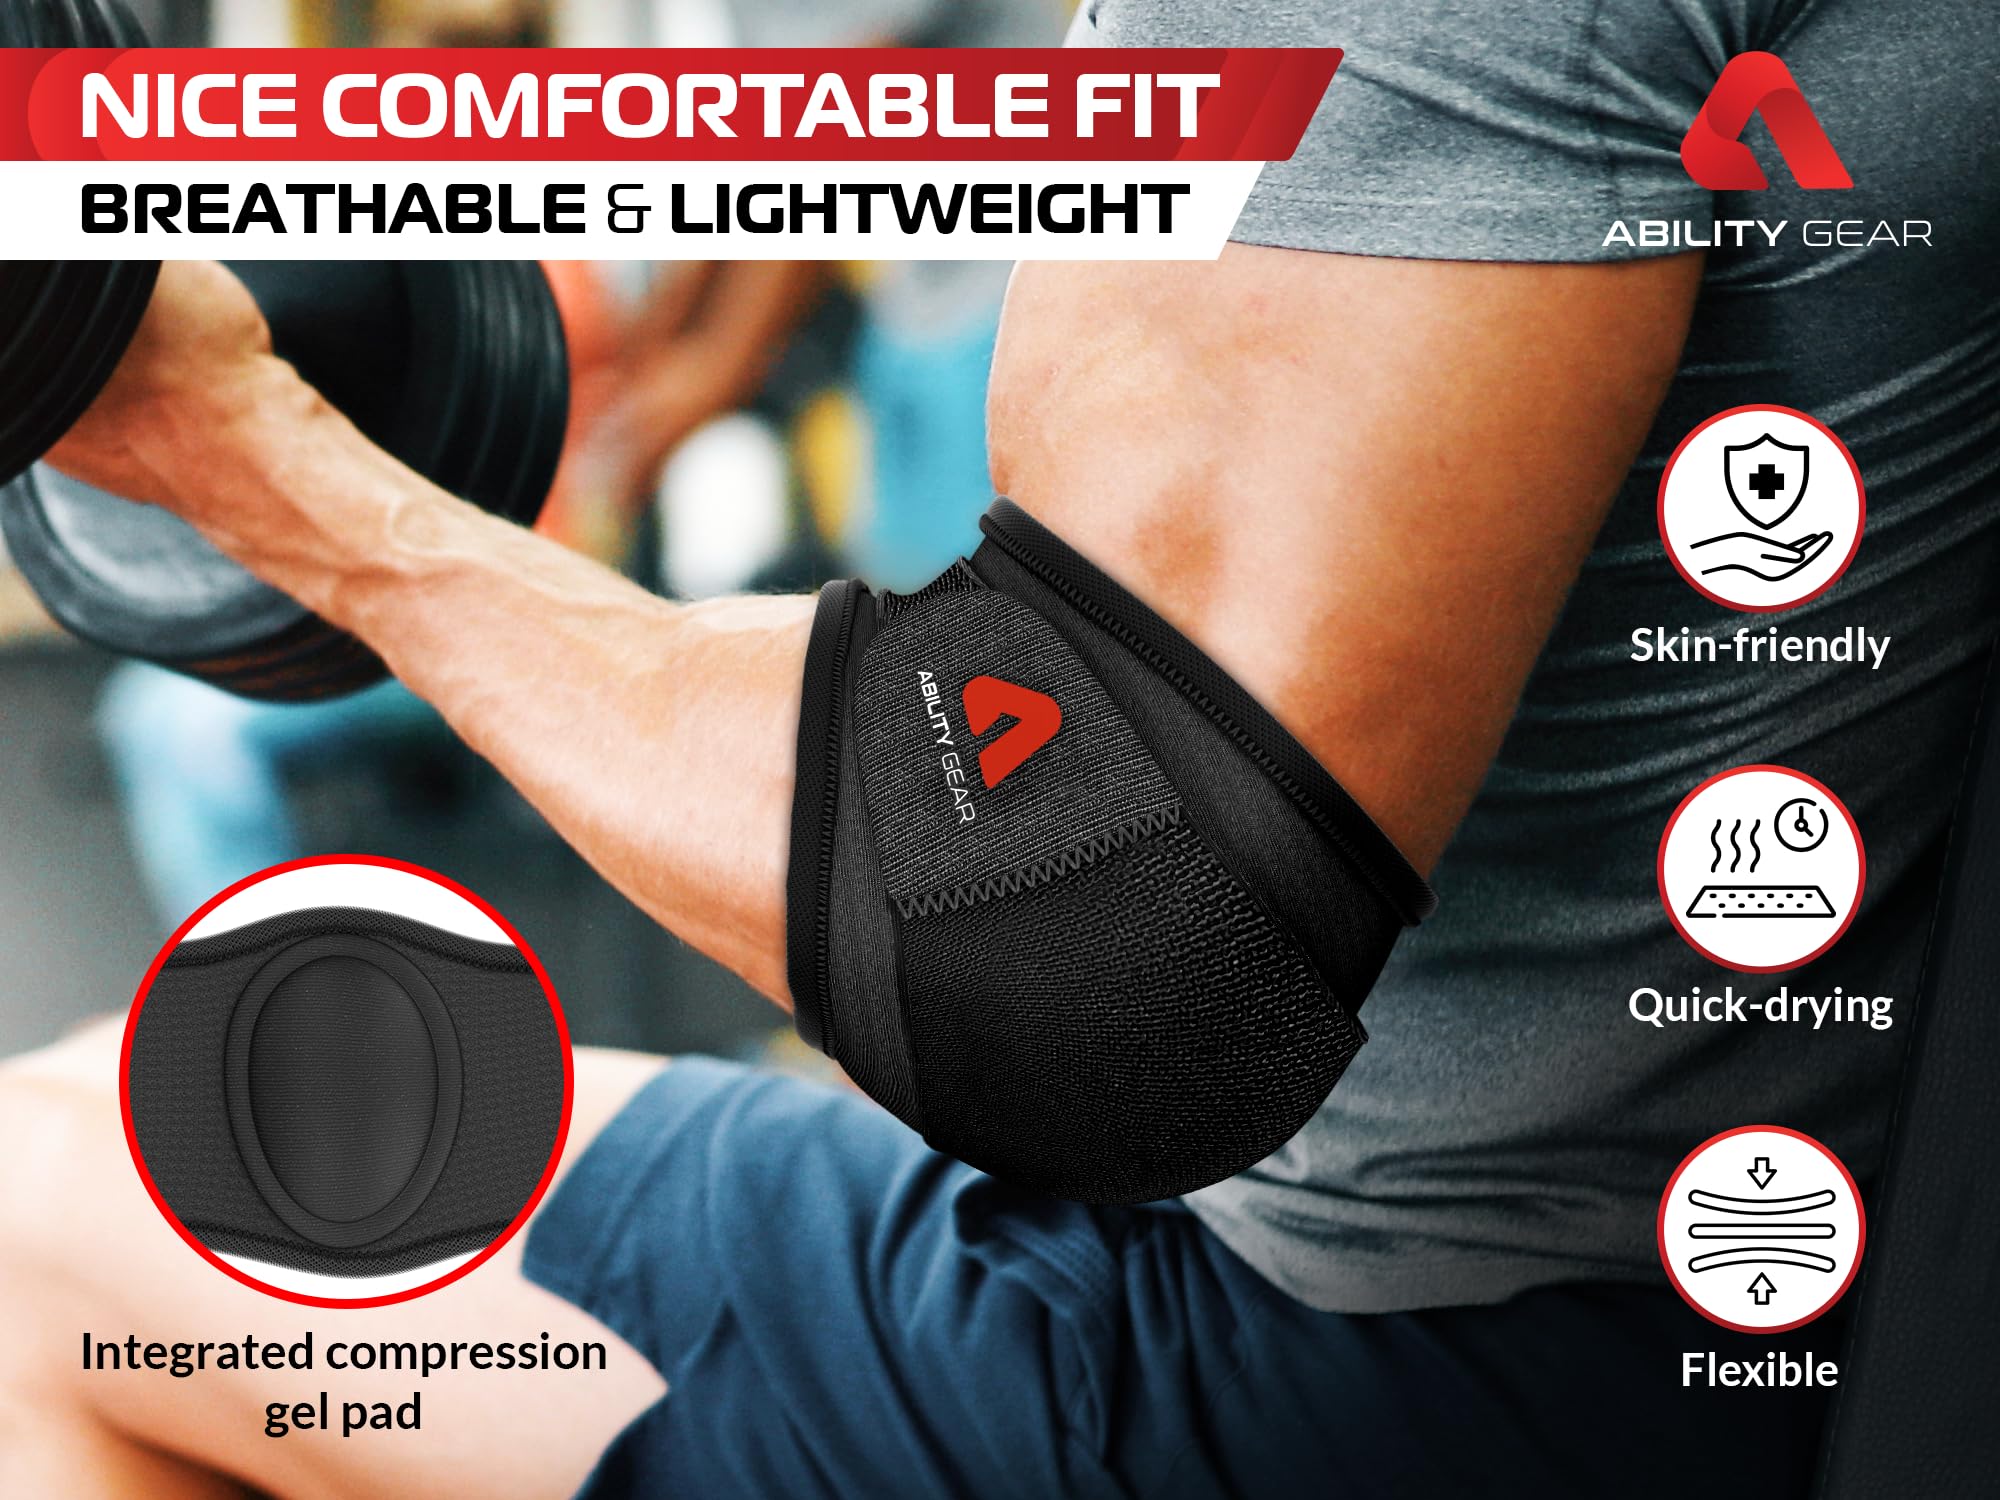 ABILITY GEAR, Adjustable Arm Sling, Tennis Elbow Brace, quality materials, lifestyle, top-quality, maintaining peak, swiftly, peak performance, CONTACT DETAILS,